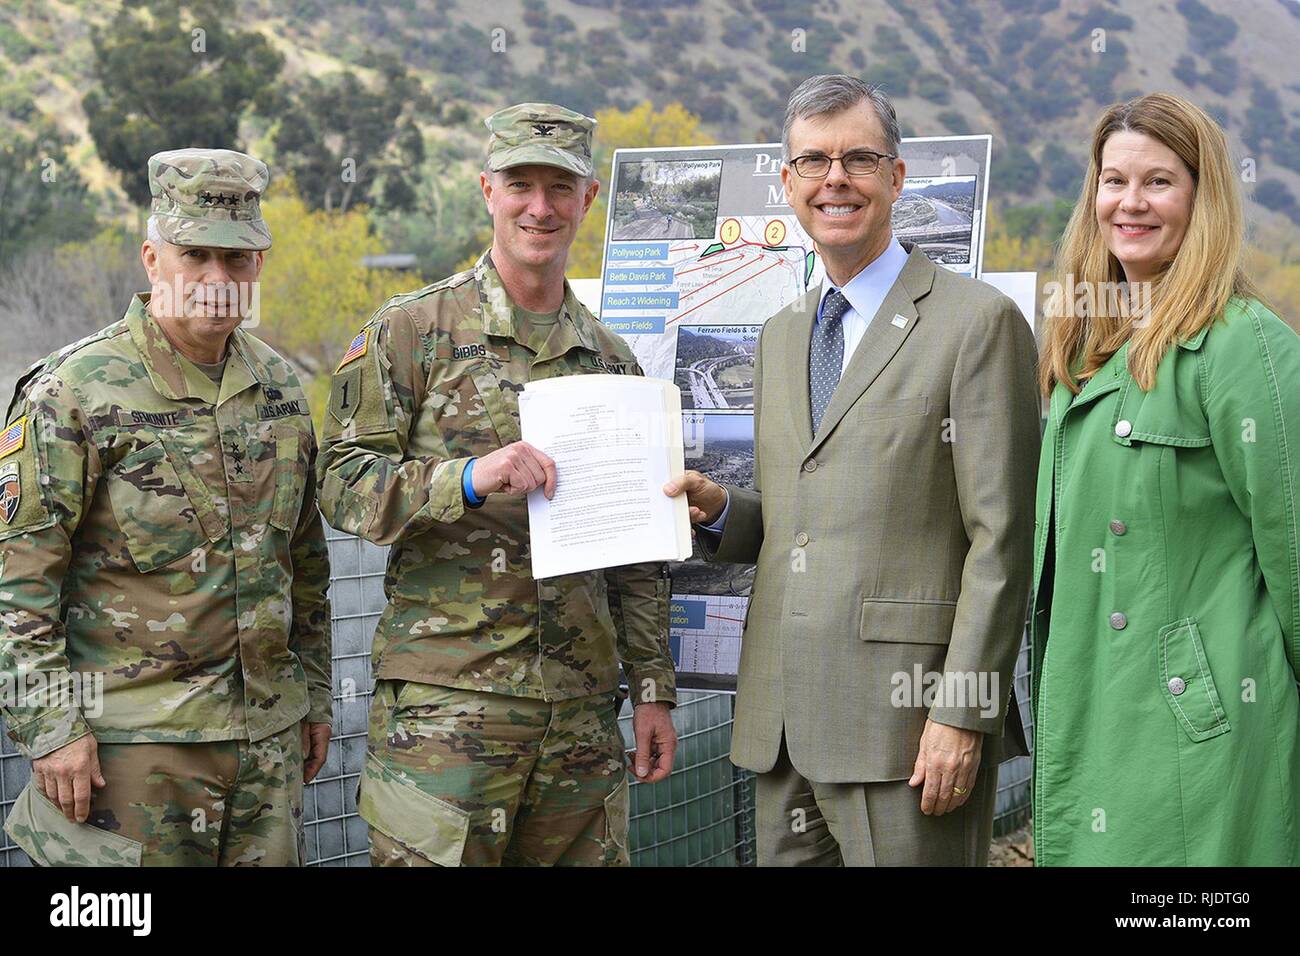 From left to right, Lt. Gen. Todd Semonite, commanding general of U.S. Army Corps of Engineers; Col. Kirk Gibbs, commander of the U.S. Army Corps of Engineers Los Angeles District; Gary Lee Moore, Los Angeles city engineer; and Carol Armstrong, executive officer to the Los Angeles Deputy Mayor of City Services, pose for a picture Jan. 19 after Corps of Engineers leaders presented a signed design agreement with the city to move forward with the Los Angeles River Ecosystem Restoration project. The design agreement allows the Corps’ Los Angeles District to begin the preconstruction, engineering a Stock Photo